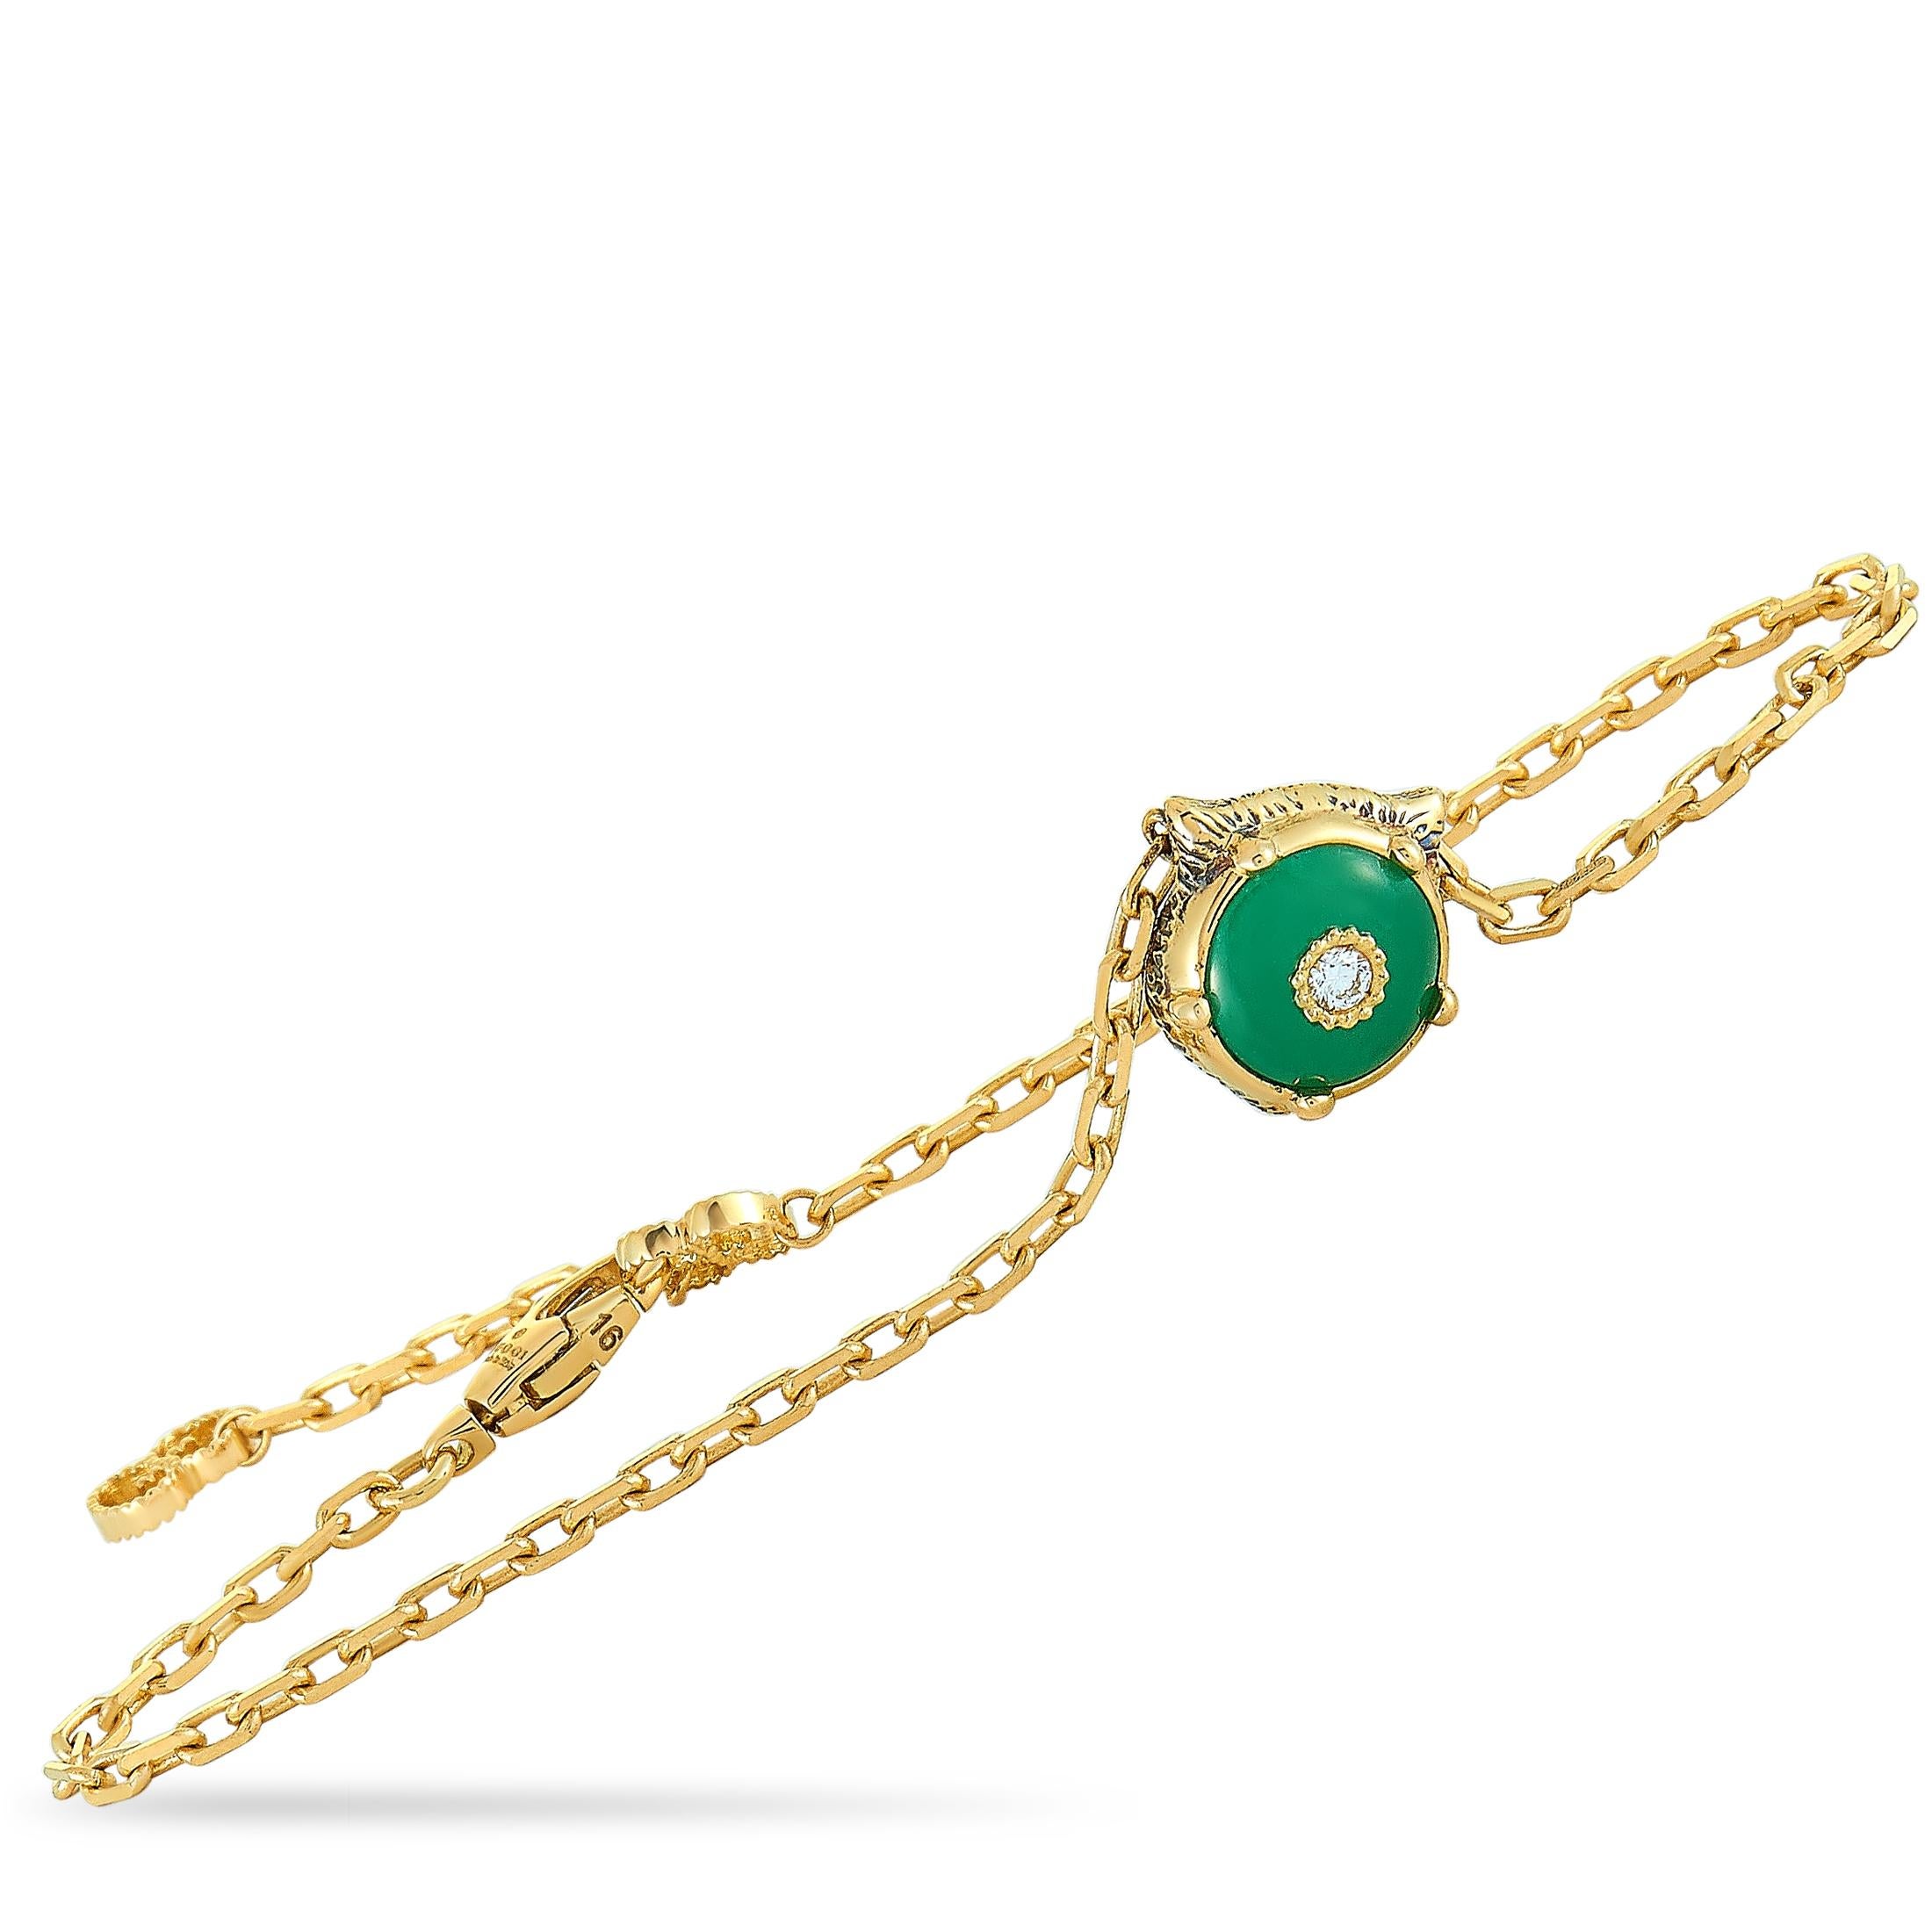 The Gucci “LMDM” bracelet is crafted from 18K yellow gold and set with a jade and three diamond stones. The jade weighs approximately 1.45 carats and the diamonds boast GH color and VVS clarity and amount to approximately 0.05 carats. The bracelet